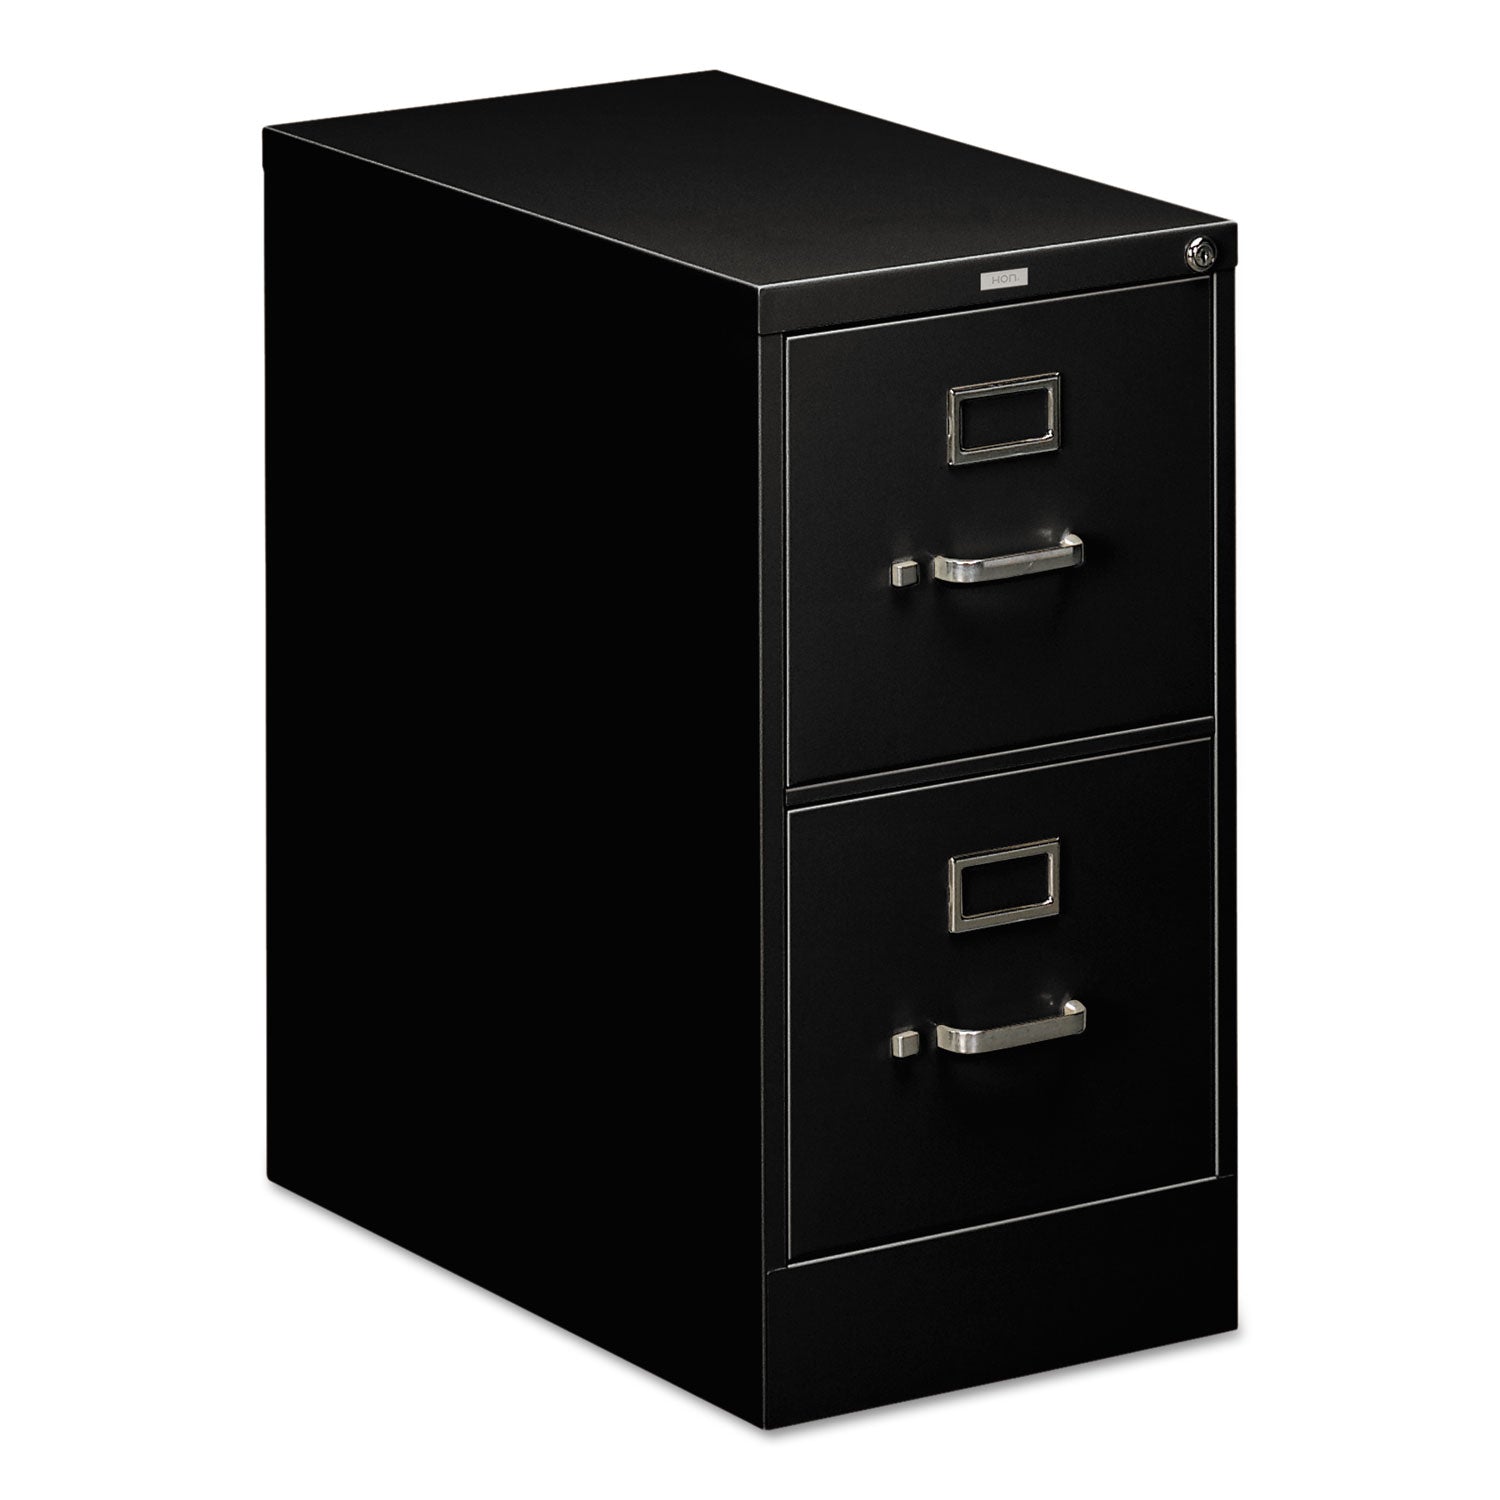 510 Series Vertical File, 2 Letter-Size File Drawers, Black, 15" x 25" x 29 - 